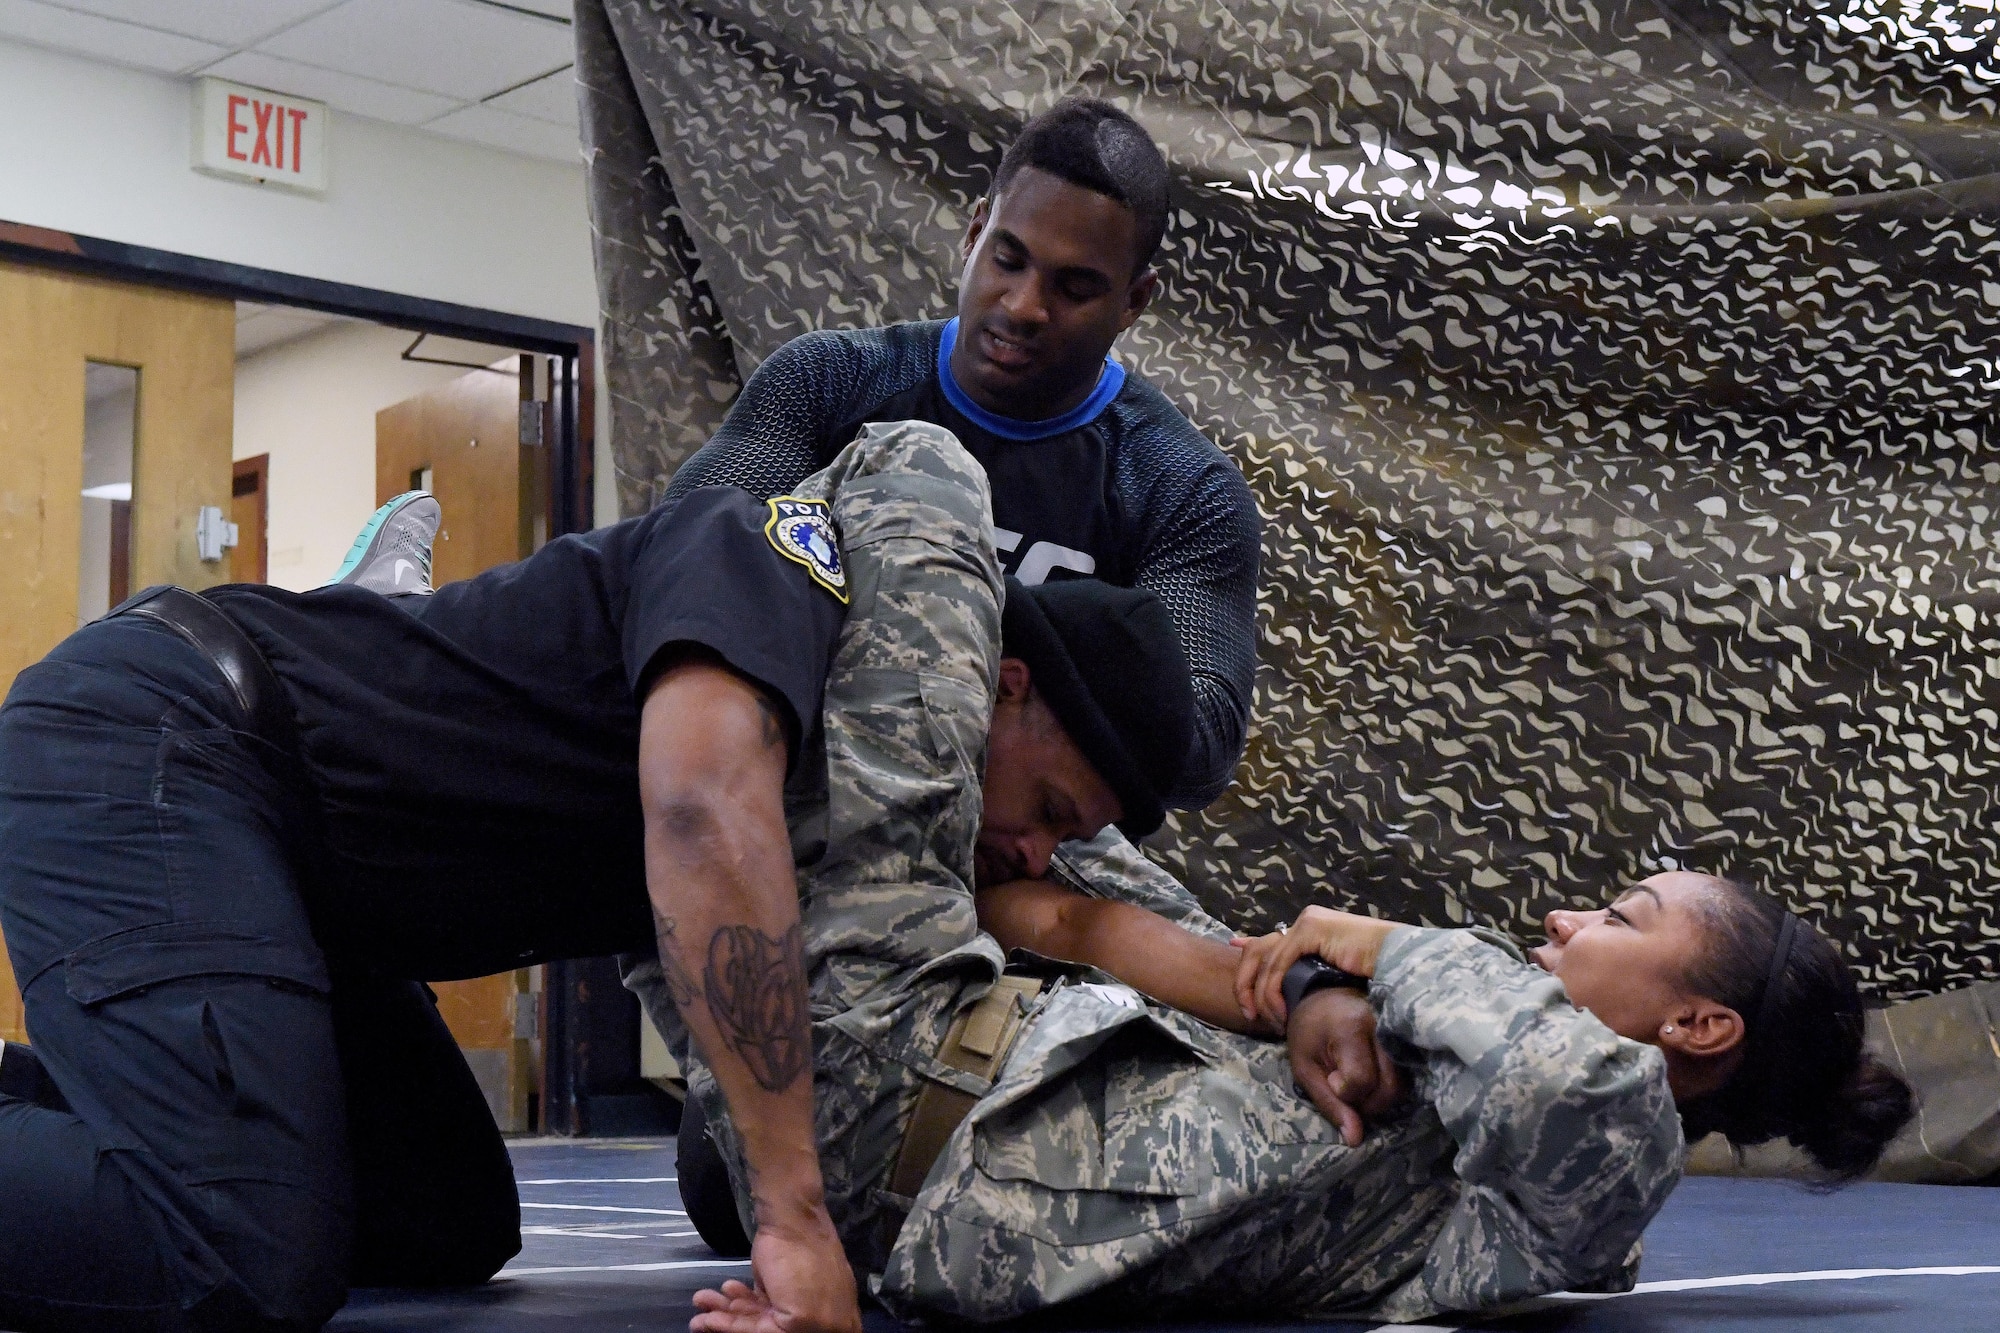 Senior Airman Jexsira Watts, 633rd Security Forces Squadron response force leader, applies a triangle choke on Tony Molette, 633rd SFS law enforcement officer, with assistance from Lorenz Larkin, a professional Ultimate Fighting Championship mixed martial artist, during a combatives course at Joint Base Langley-Eustis, Va., Dec. 8, 2016. Larkin’s appearance was part of a distinguished visitor tour where military members and dependents had an opportunity to meet and get autographs from Shevchenko, other UFC fighters and radio hosts throughout the week. During the tour the UFC athletes spoke with service members about similarities between the UFC and the U.S. Armed Forces. (U.S. Air Force photo by Staff Sgt. Nick Wilson)